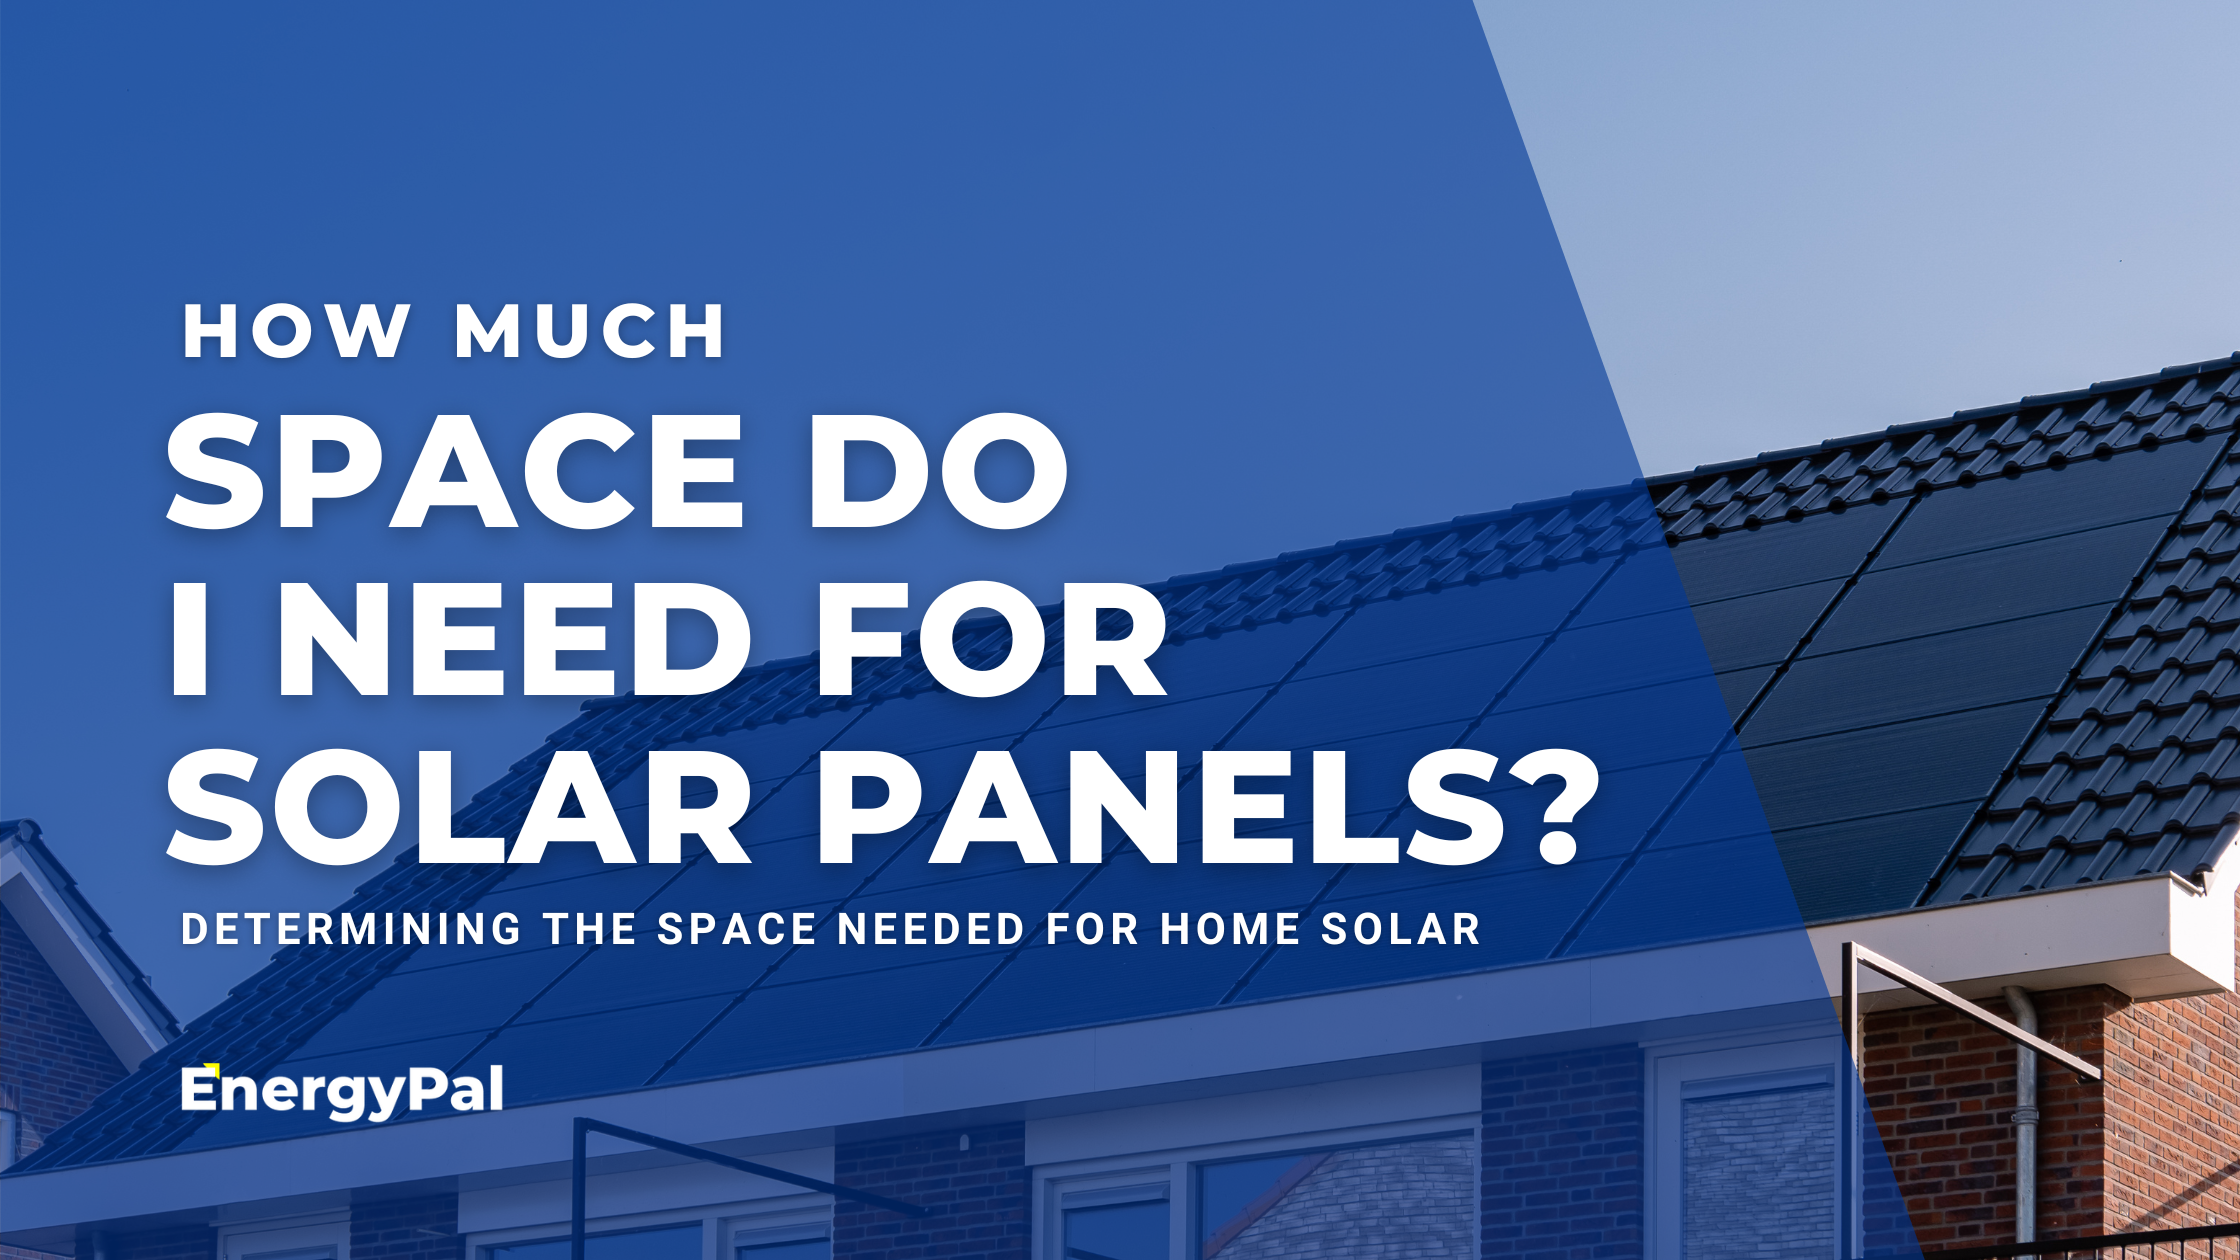 How much space do I need for solar panels?